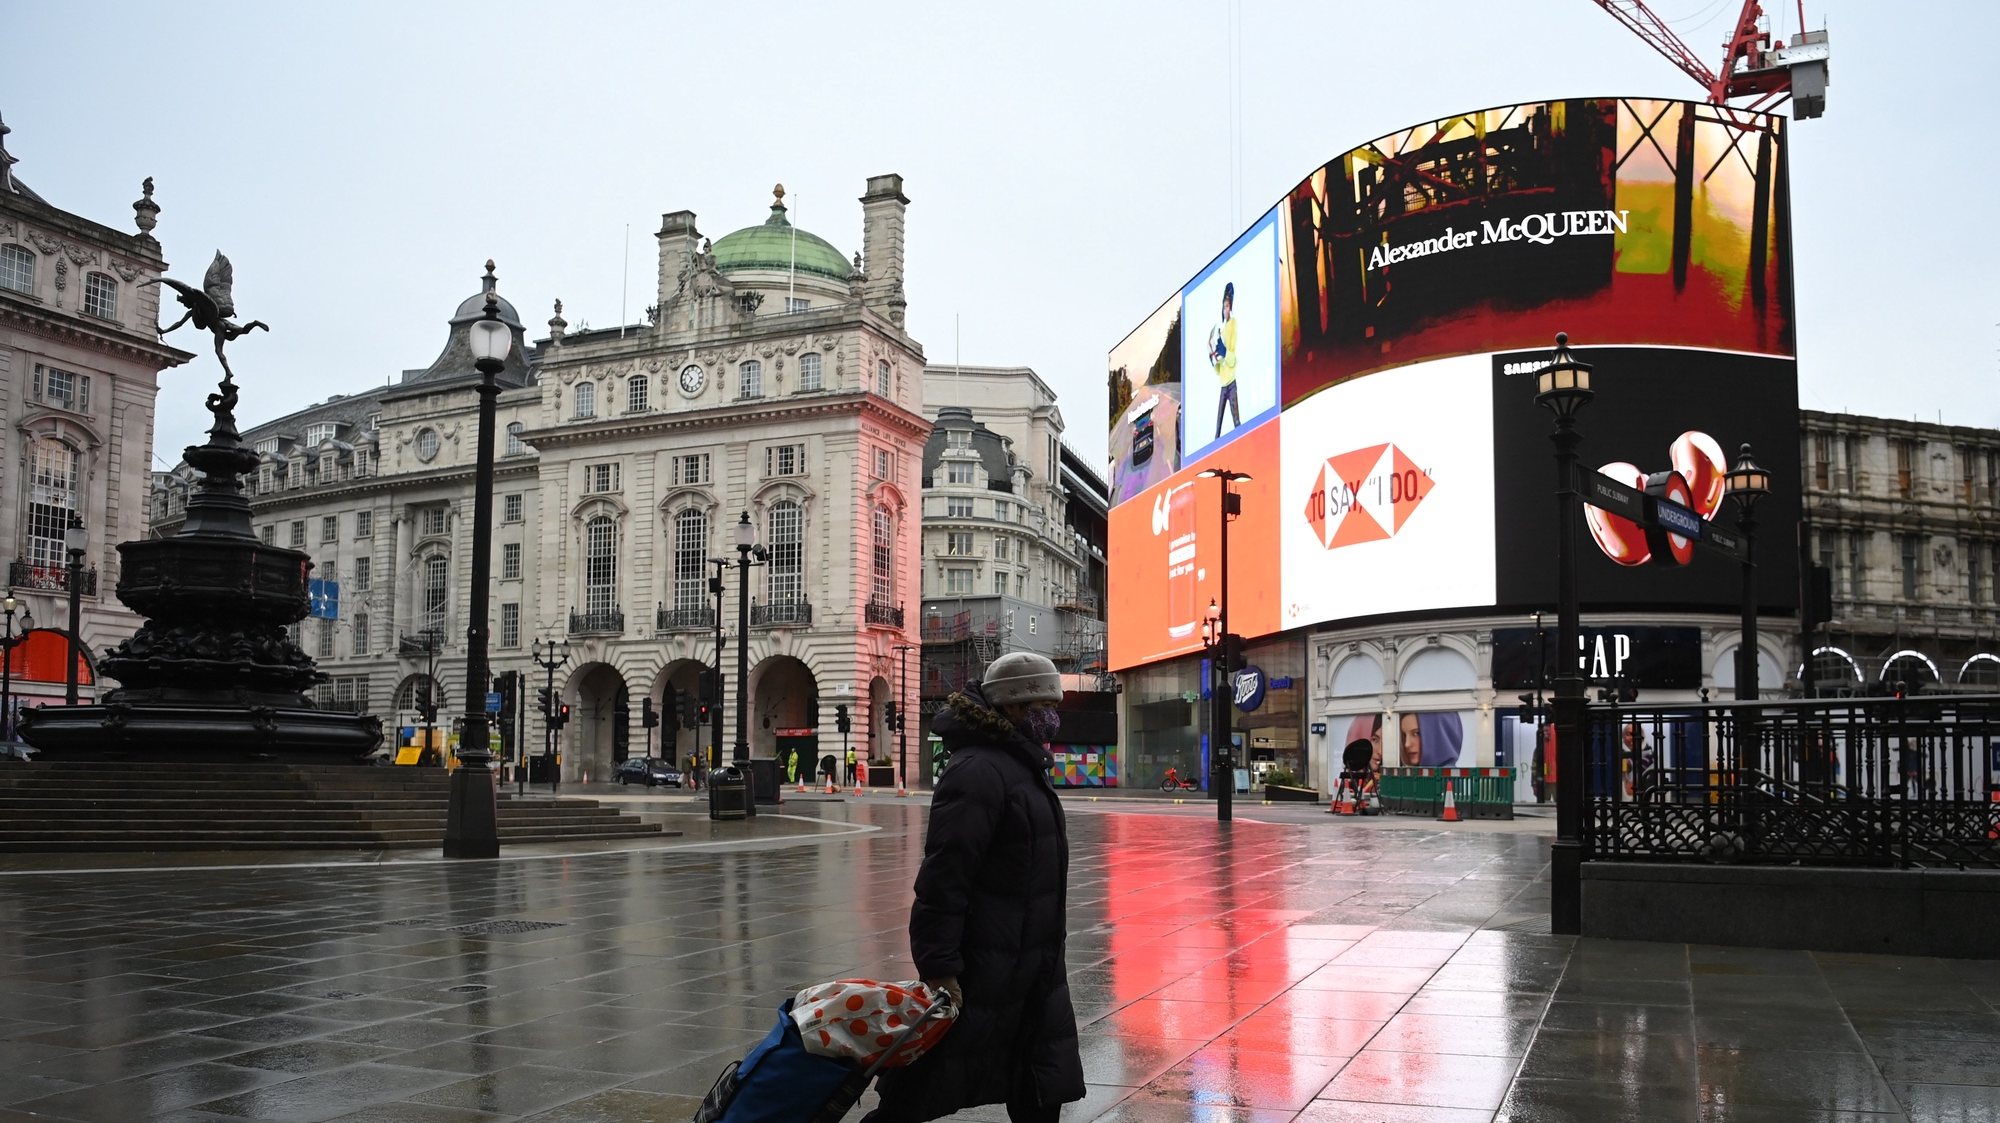 epa08920047 A masked woman passes a quiet Piccadilly Circus in London, Britain, 05 January 2021. British Prime Minister Boris Johnson announced on 04 January evening that there would be a third national lockdown in England. The regulations, expected to remain in place until the middle of February, will be presented in parliament on 05 January and subject to a vote on 06 January 2021.  EPA/NEIL HALL